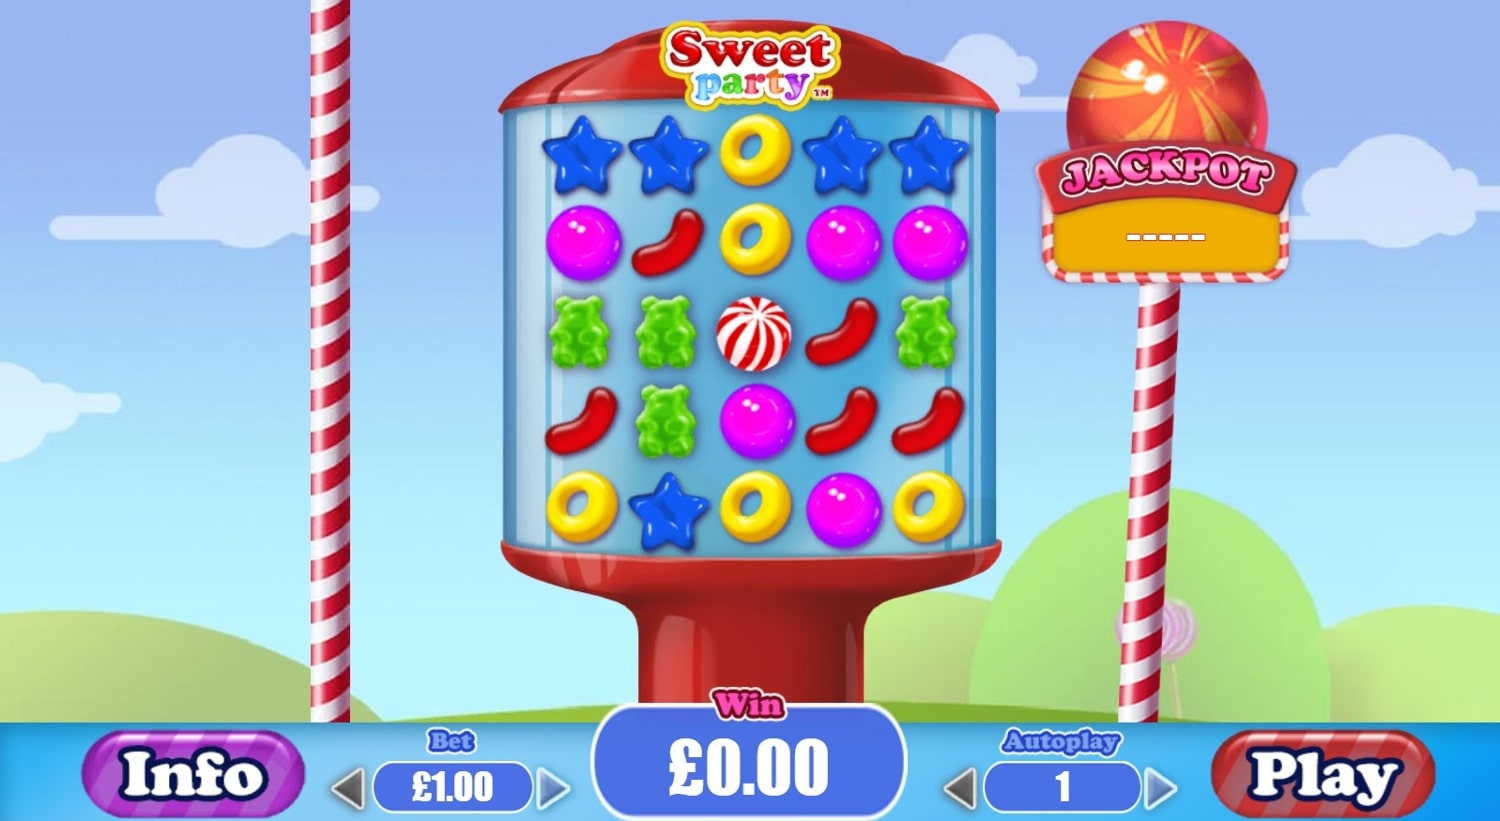 Sweet Party Free Spins